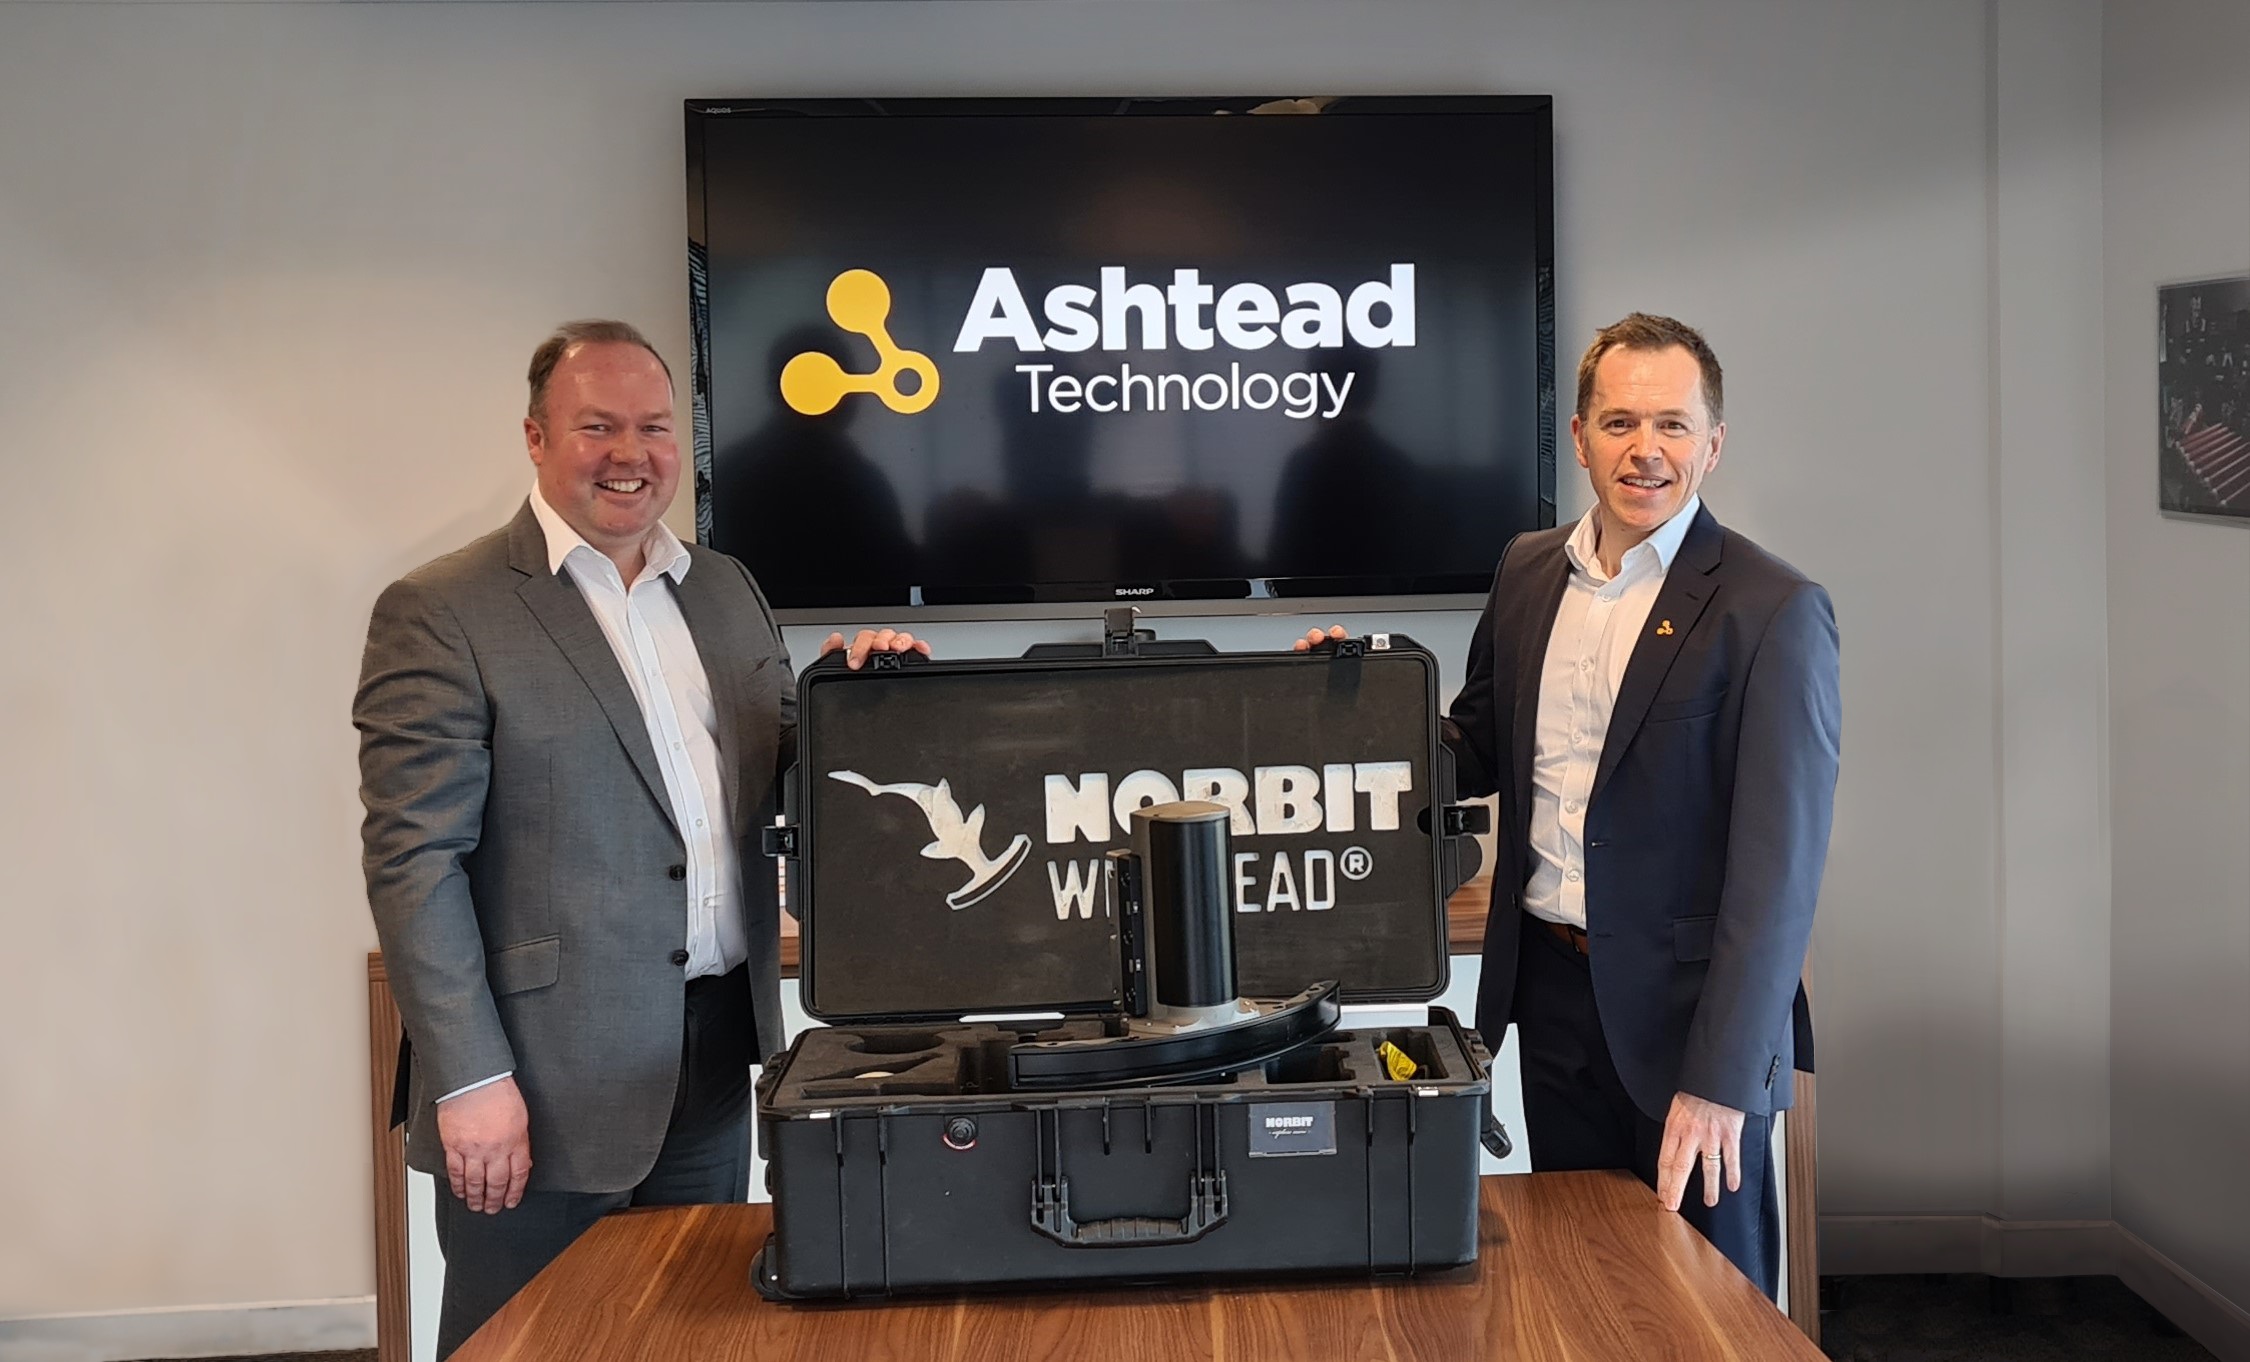 MEMBER NEWS: Ashtead Technology signs reseller agreement with NORBIT Subsea